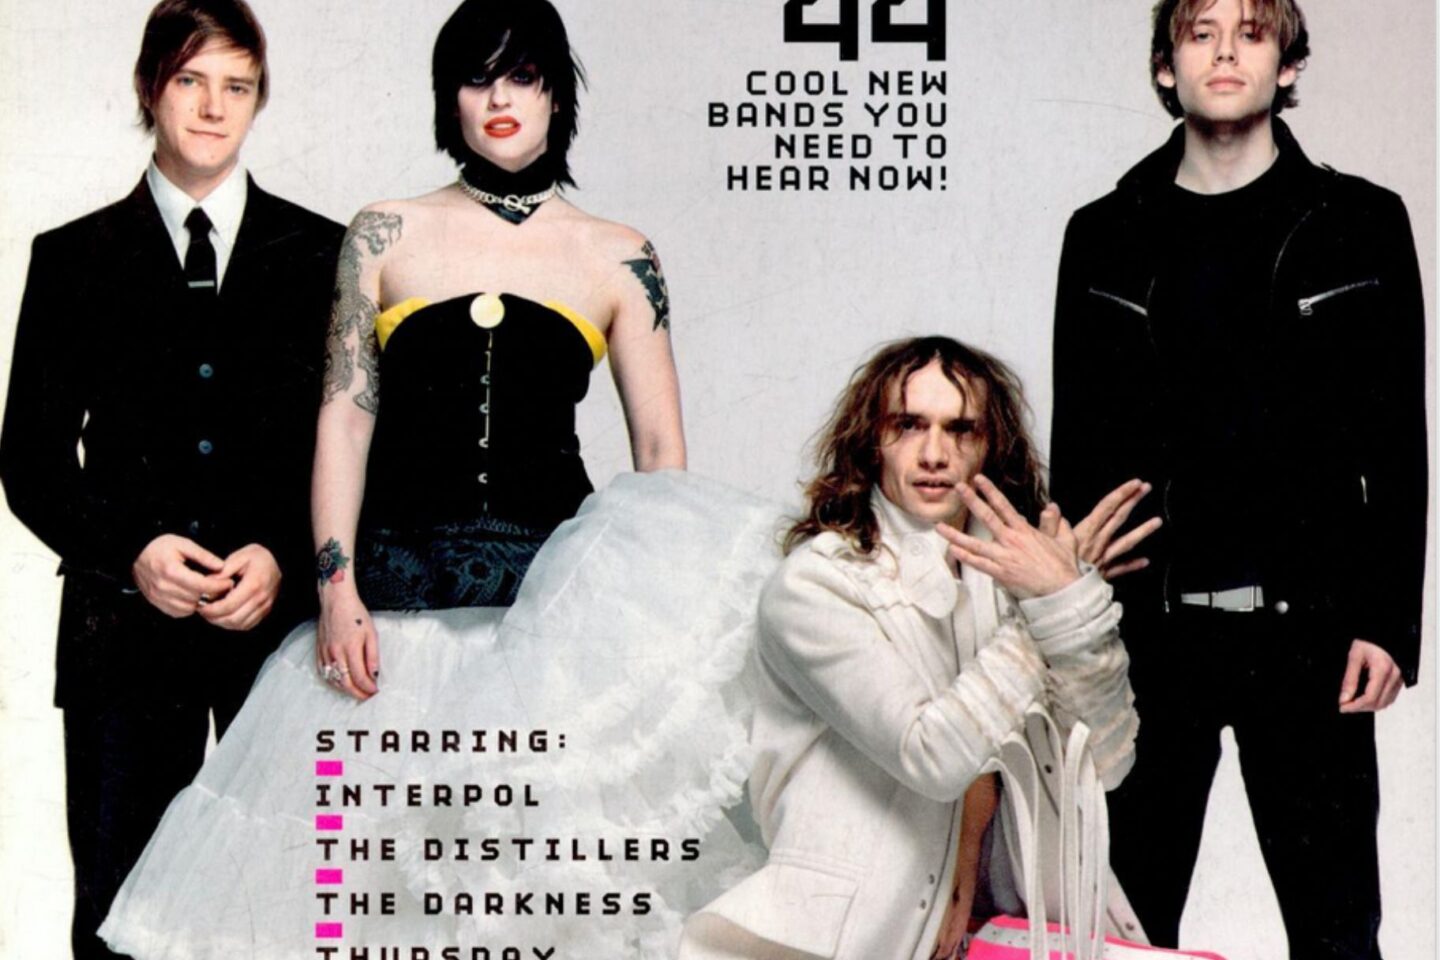 SPIN February 2004 cover